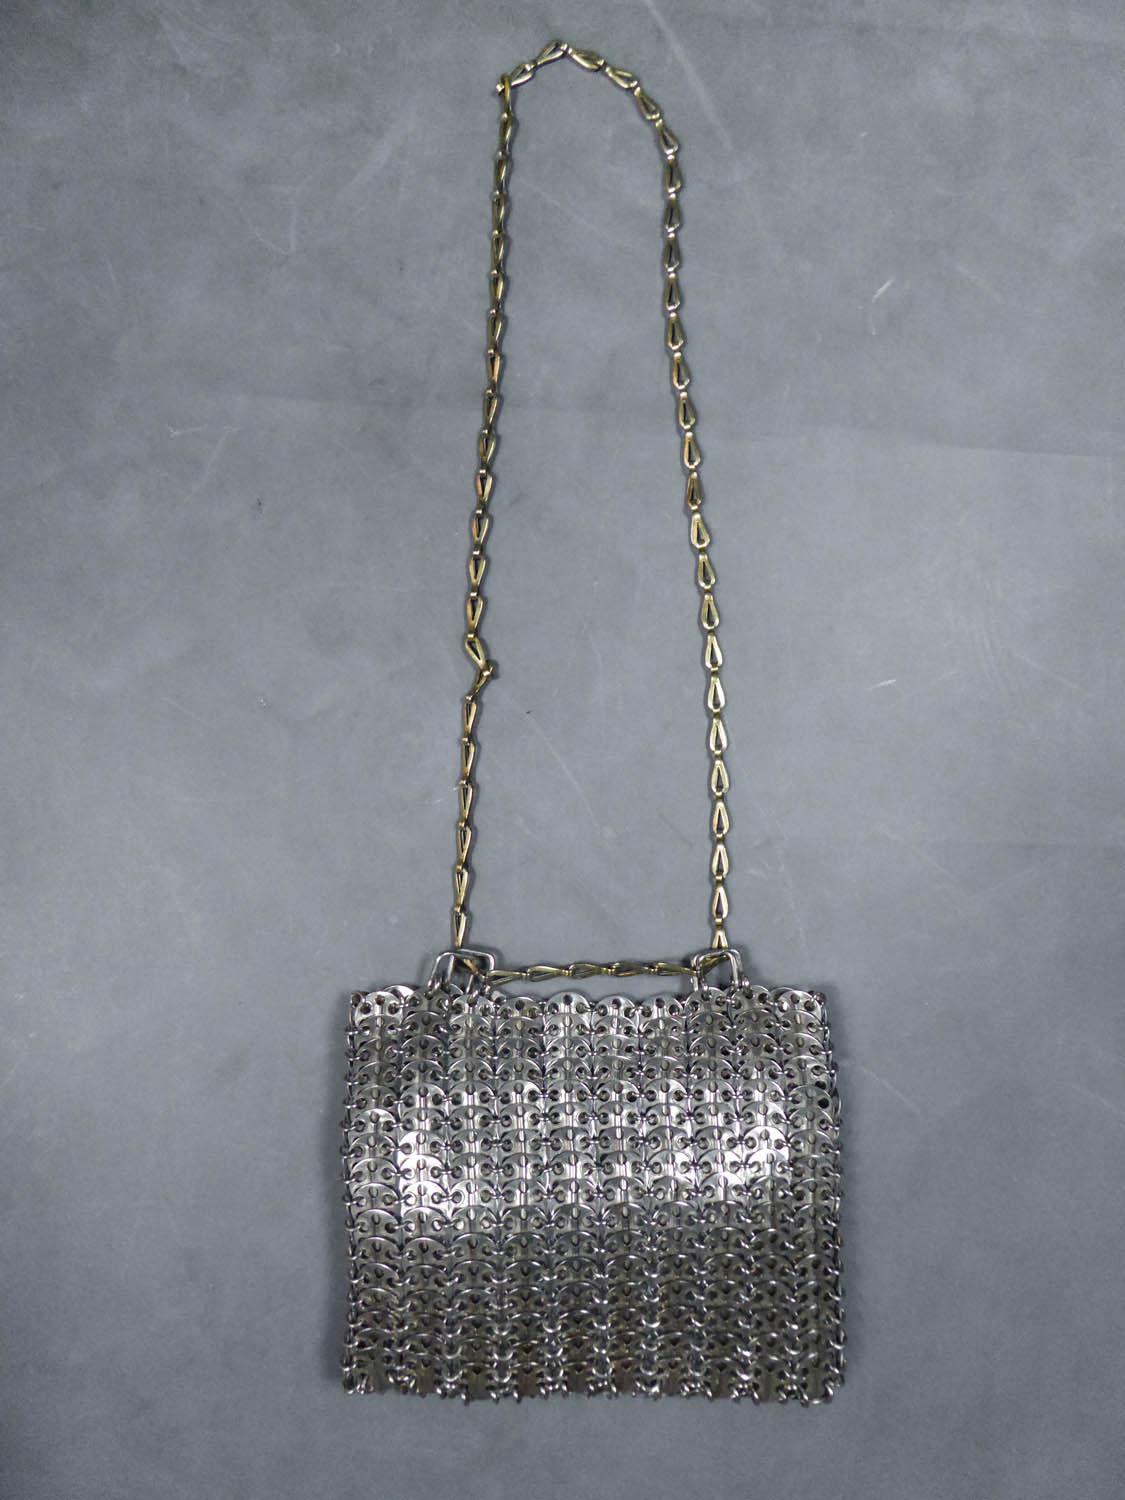 Circa 1968
France

Iconic Designer's bag or purse from the first period of the designer Paco Rabanne at the end of the 1960's. Assembly of perforated steel discs placed on other steel discs and connected by rings. Retained by a sliding chain of